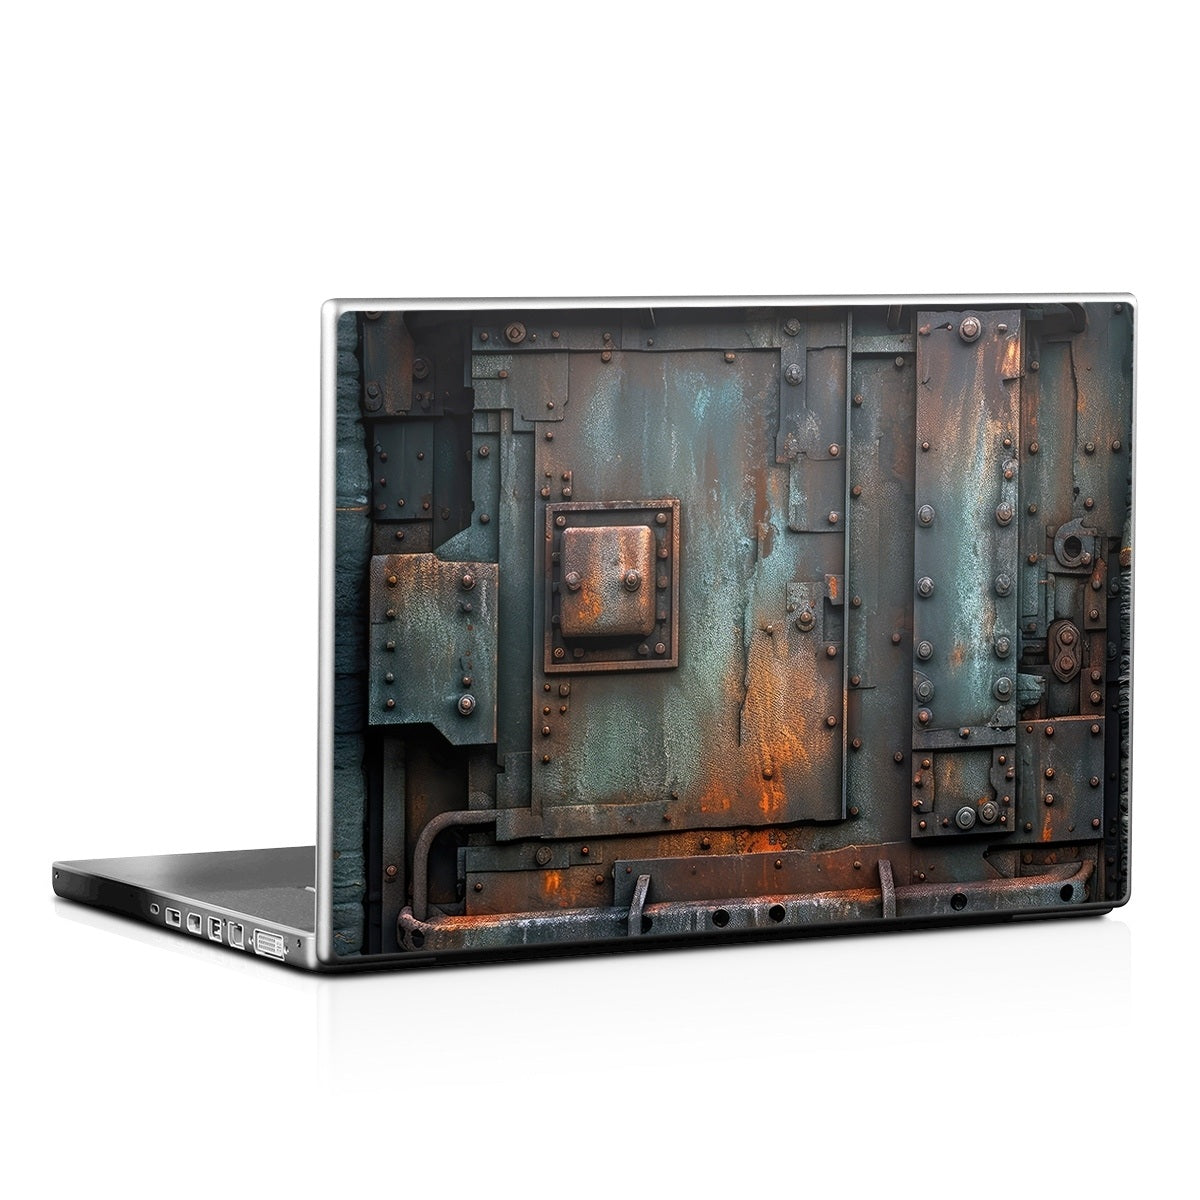 Custom Removable Laptop and Tablet Skins